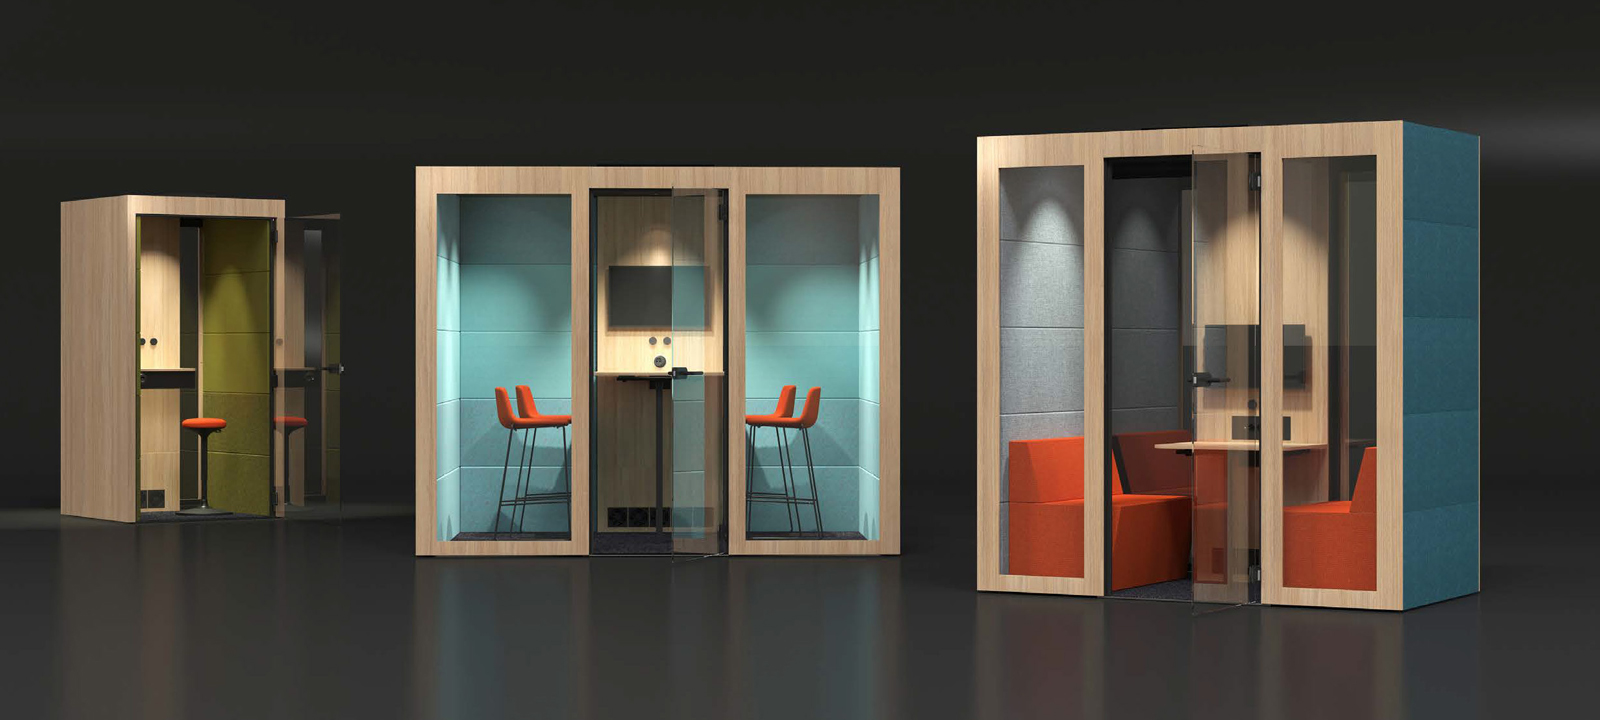 Silent Room Office Work Meeting Pods